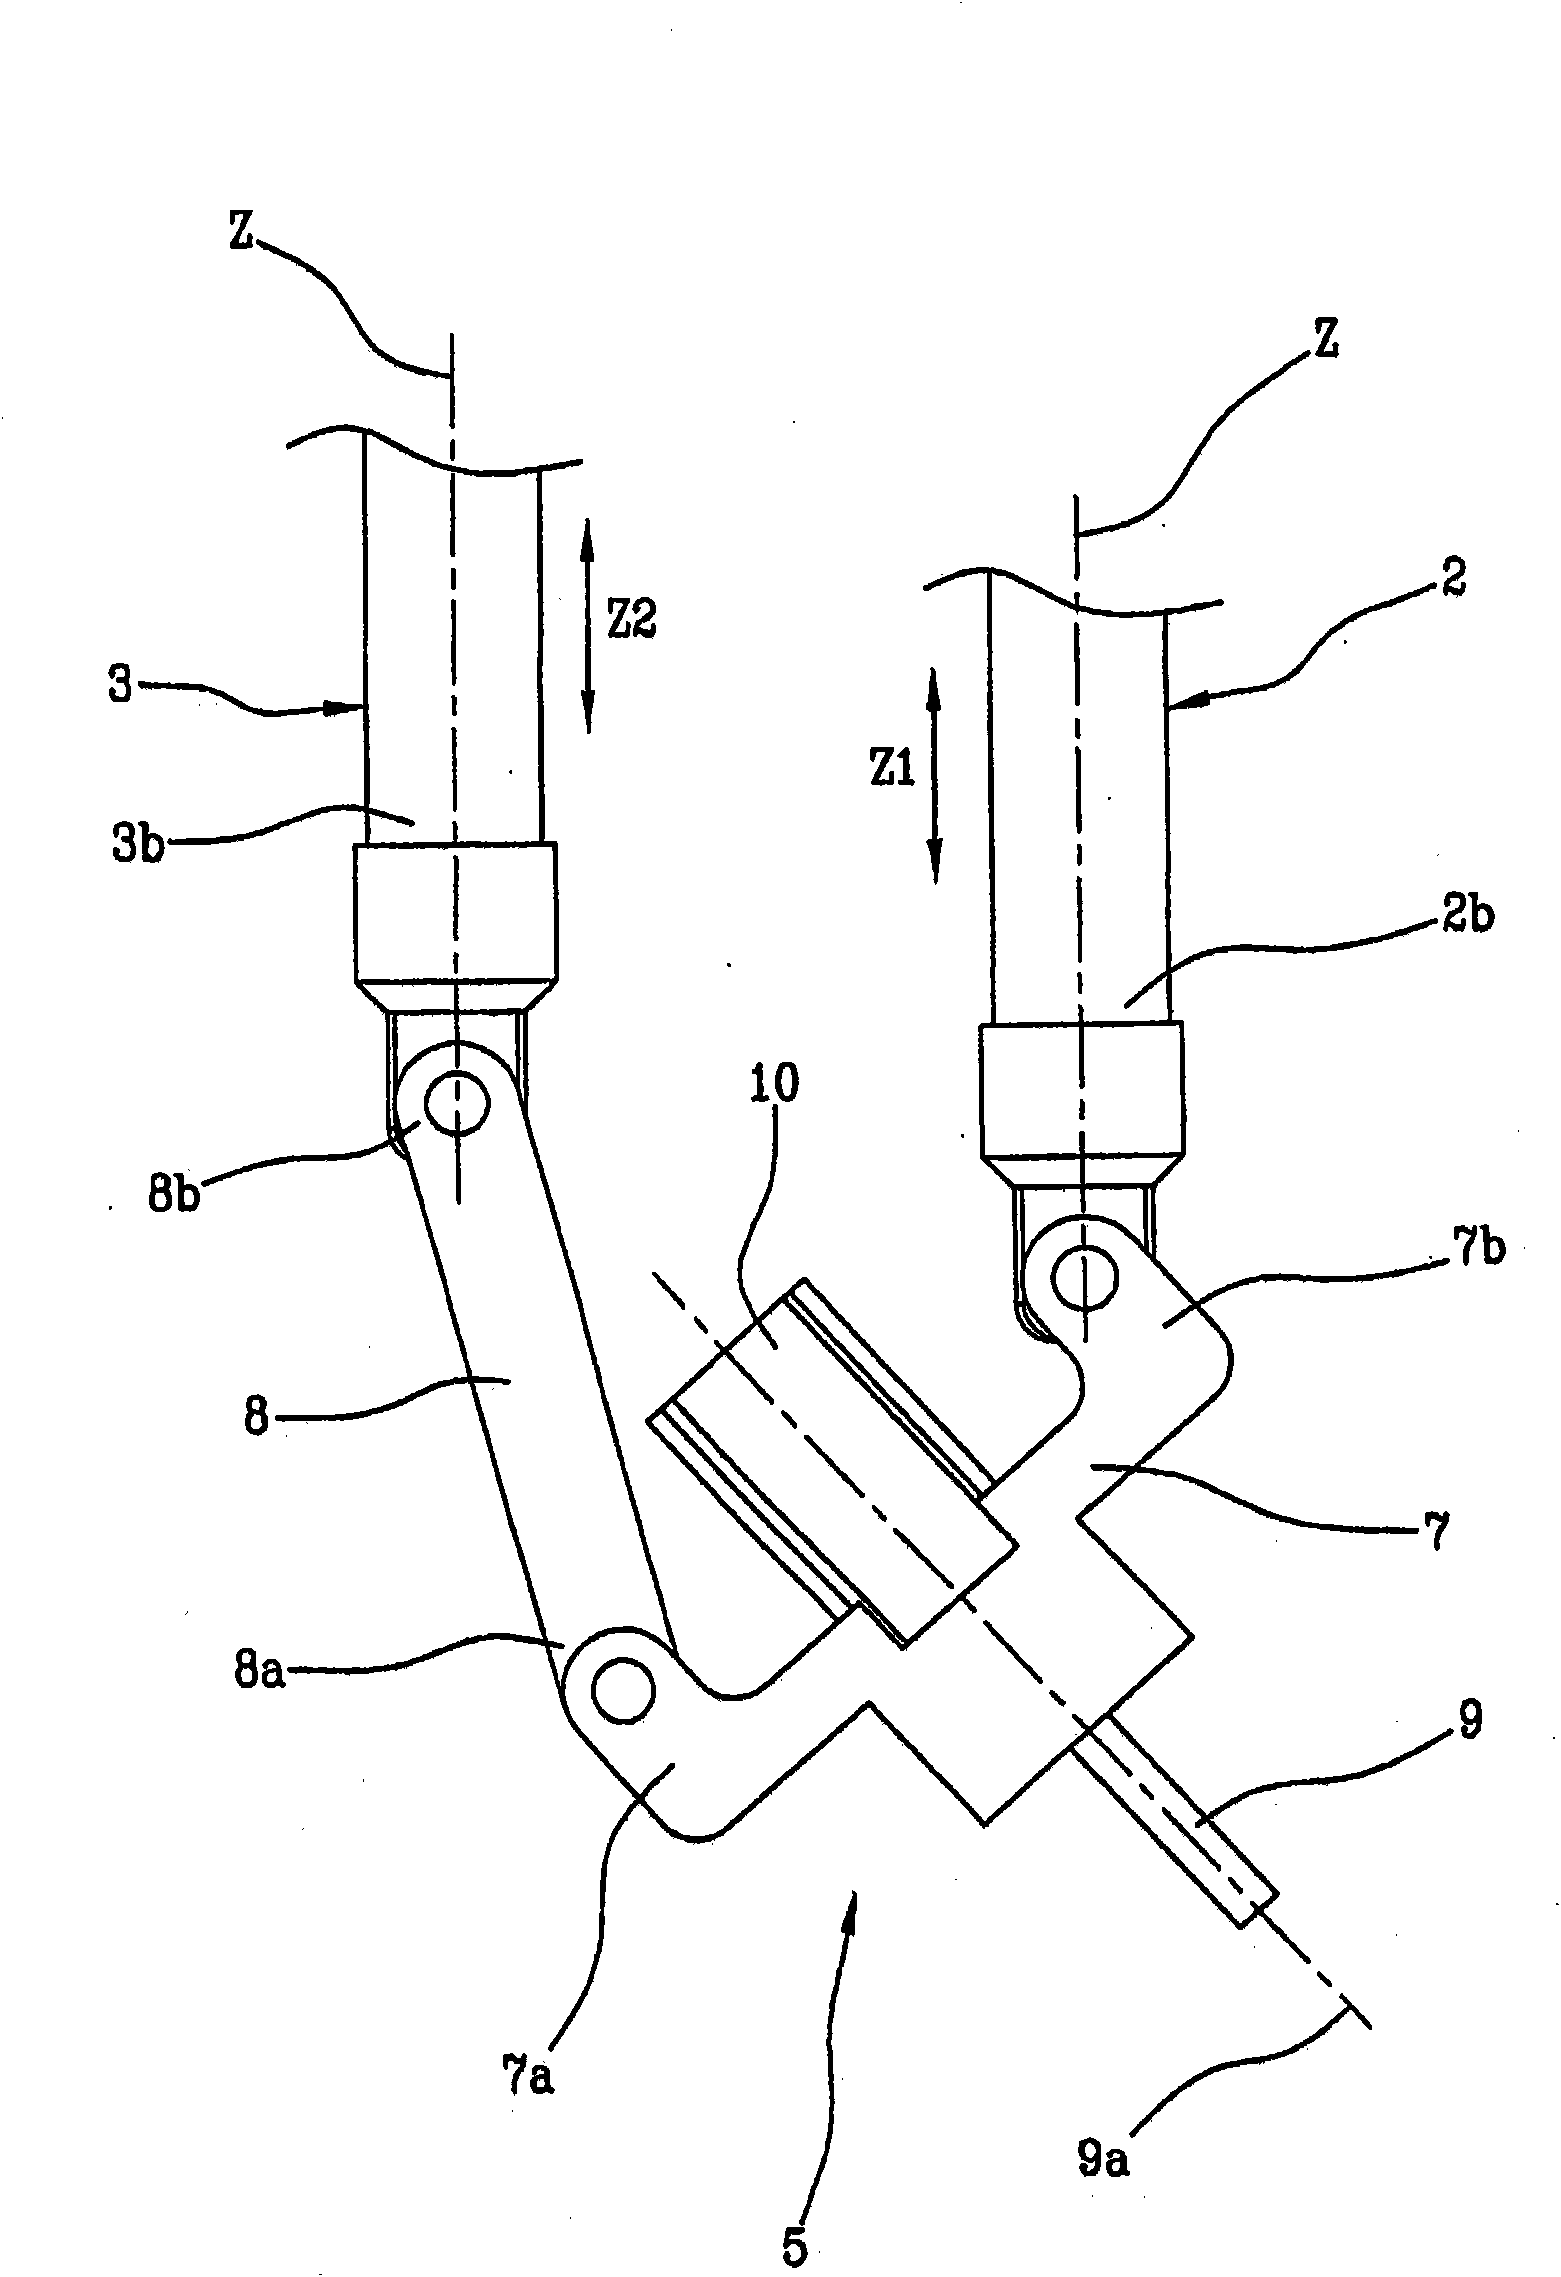 A device for handling and/or performing work operations on objects